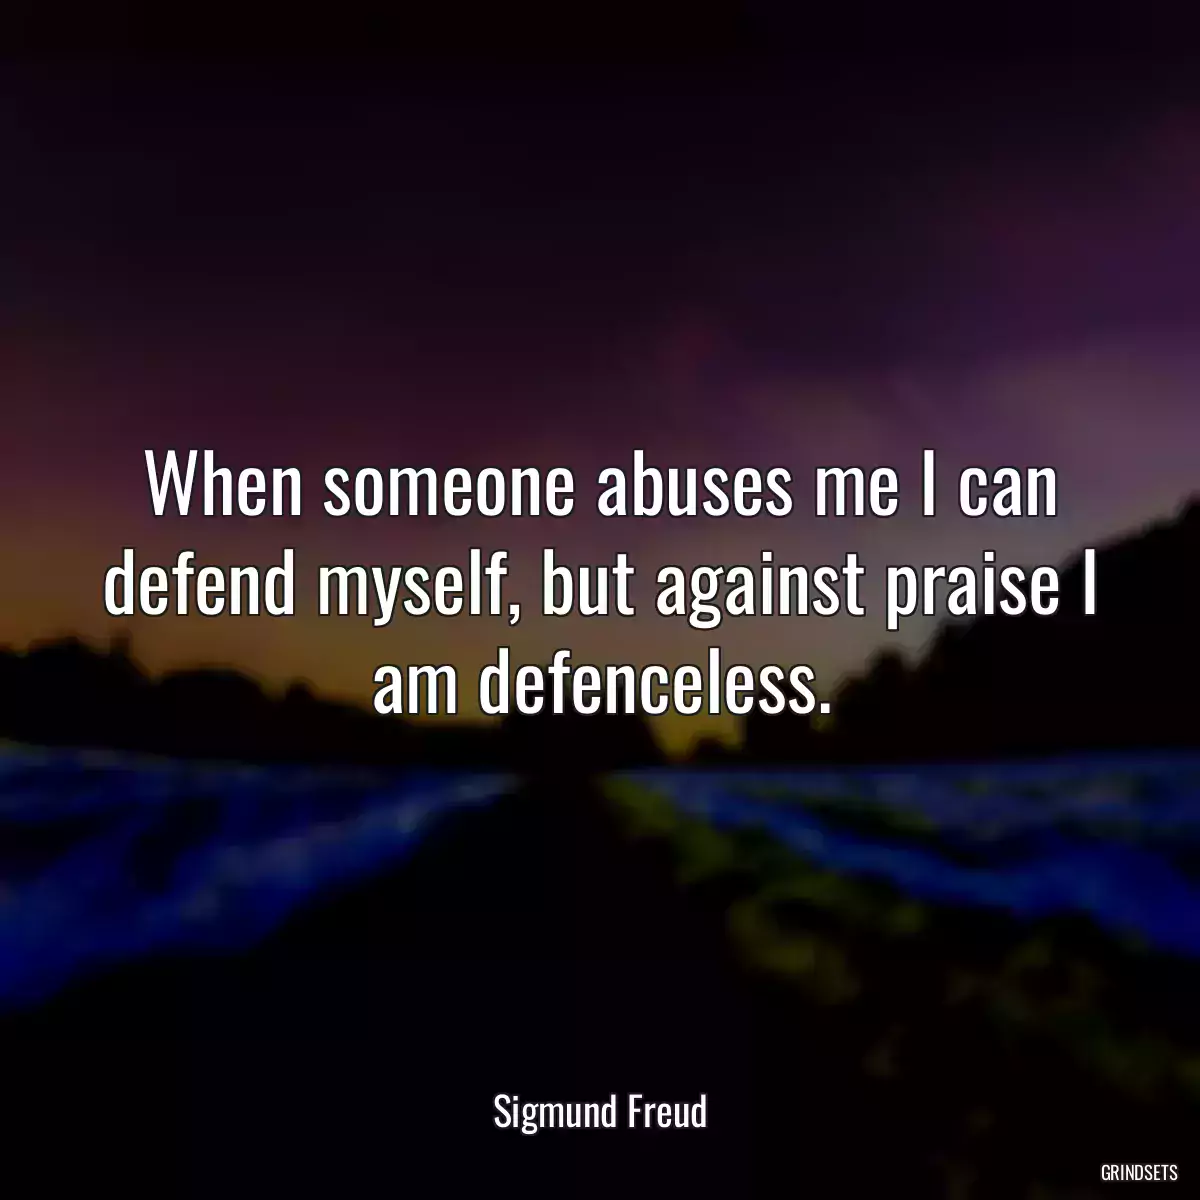 When someone abuses me I can defend myself, but against praise I am defenceless.